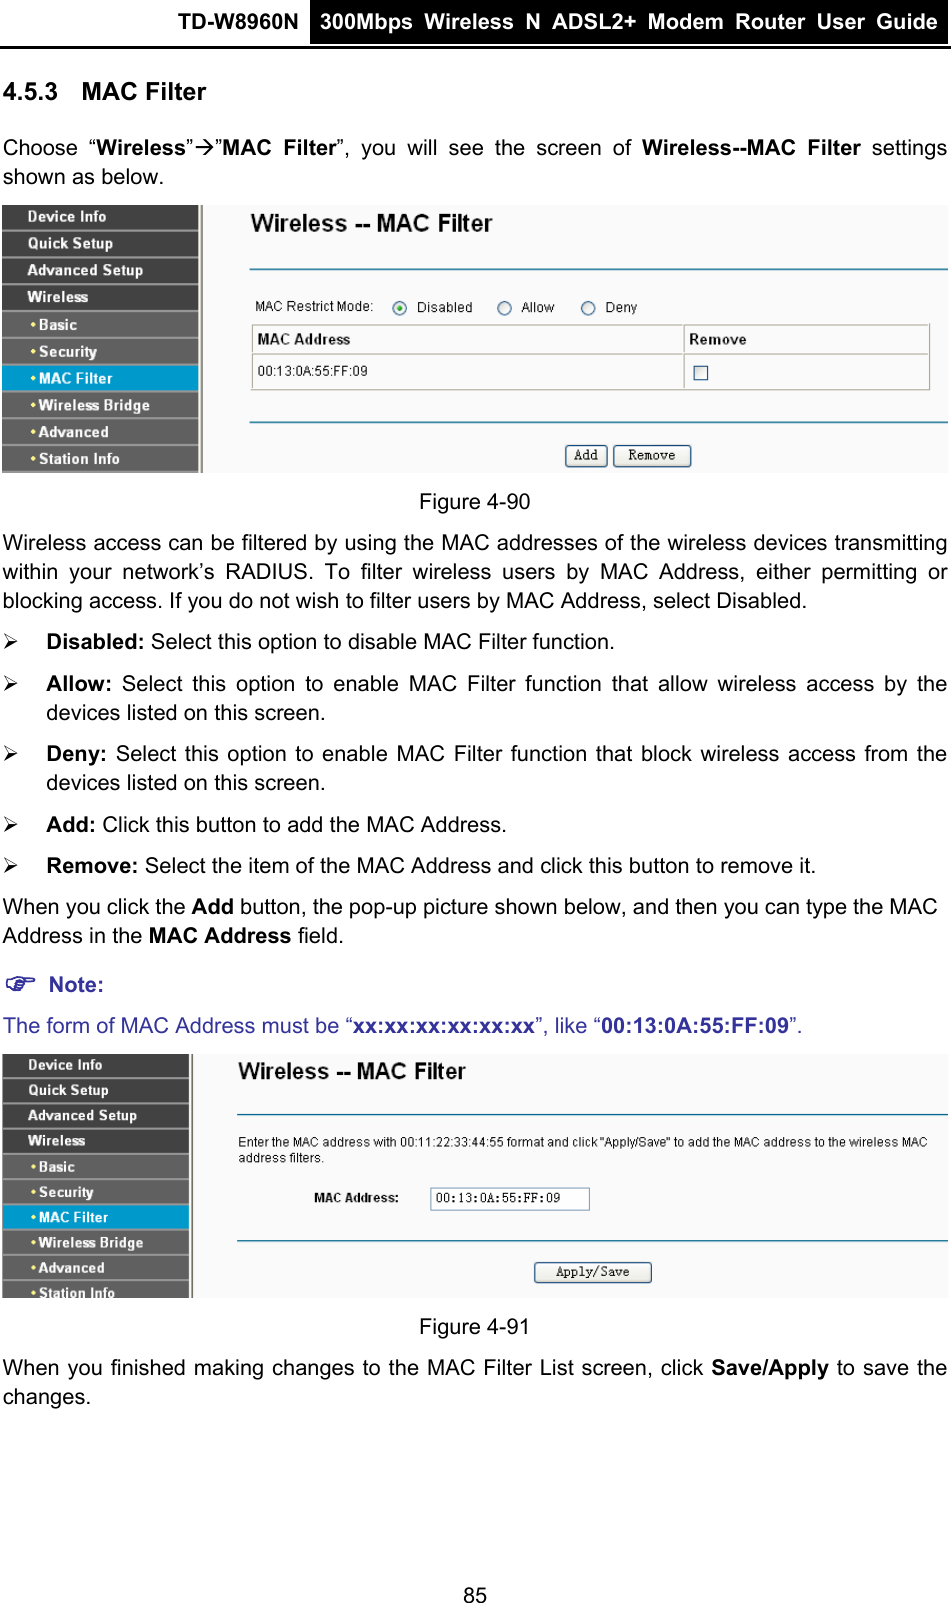 TD-W8960N  300Mbps Wireless N ADSL2+ Modem Router User Guide  4.5.3  MAC Filter Choose “Wireless”Æ”MAC Filter”, you will see the screen of Wireless--MAC Filter settings shown as below.  Figure 4-90 Wireless access can be filtered by using the MAC addresses of the wireless devices transmitting within your network’s RADIUS. To filter wireless users by MAC Address, either permitting or blocking access. If you do not wish to filter users by MAC Address, select Disabled. ¾ Disabled: Select this option to disable MAC Filter function. ¾ Allow: Select this option to enable MAC Filter function that allow wireless access by the devices listed on this screen. ¾ Deny:  Select this option to enable MAC Filter function that block wireless access from the devices listed on this screen. ¾ Add: Click this button to add the MAC Address. ¾ Remove: Select the item of the MAC Address and click this button to remove it. When you click the Add button, the pop-up picture shown below, and then you can type the MAC Address in the MAC Address field. ) Note: The form of MAC Address must be “xx:xx:xx:xx:xx:xx”, like “00:13:0A:55:FF:09”.  Figure 4-91 When you finished making changes to the MAC Filter List screen, click Save/Apply to save the changes. 85 